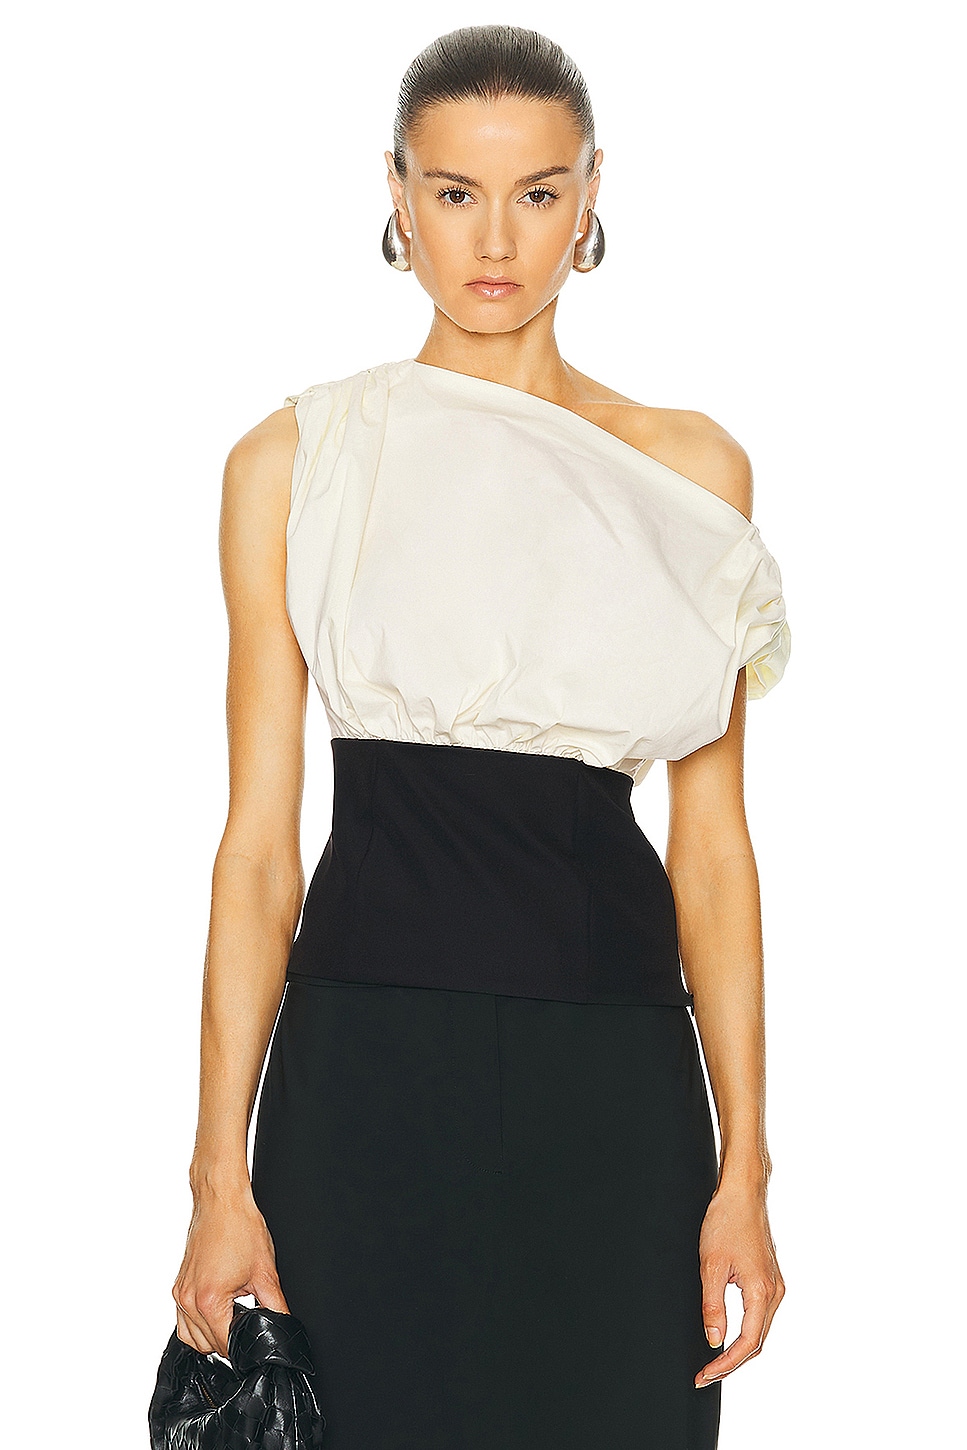 by Marianna Matteah Top in Cream,Black